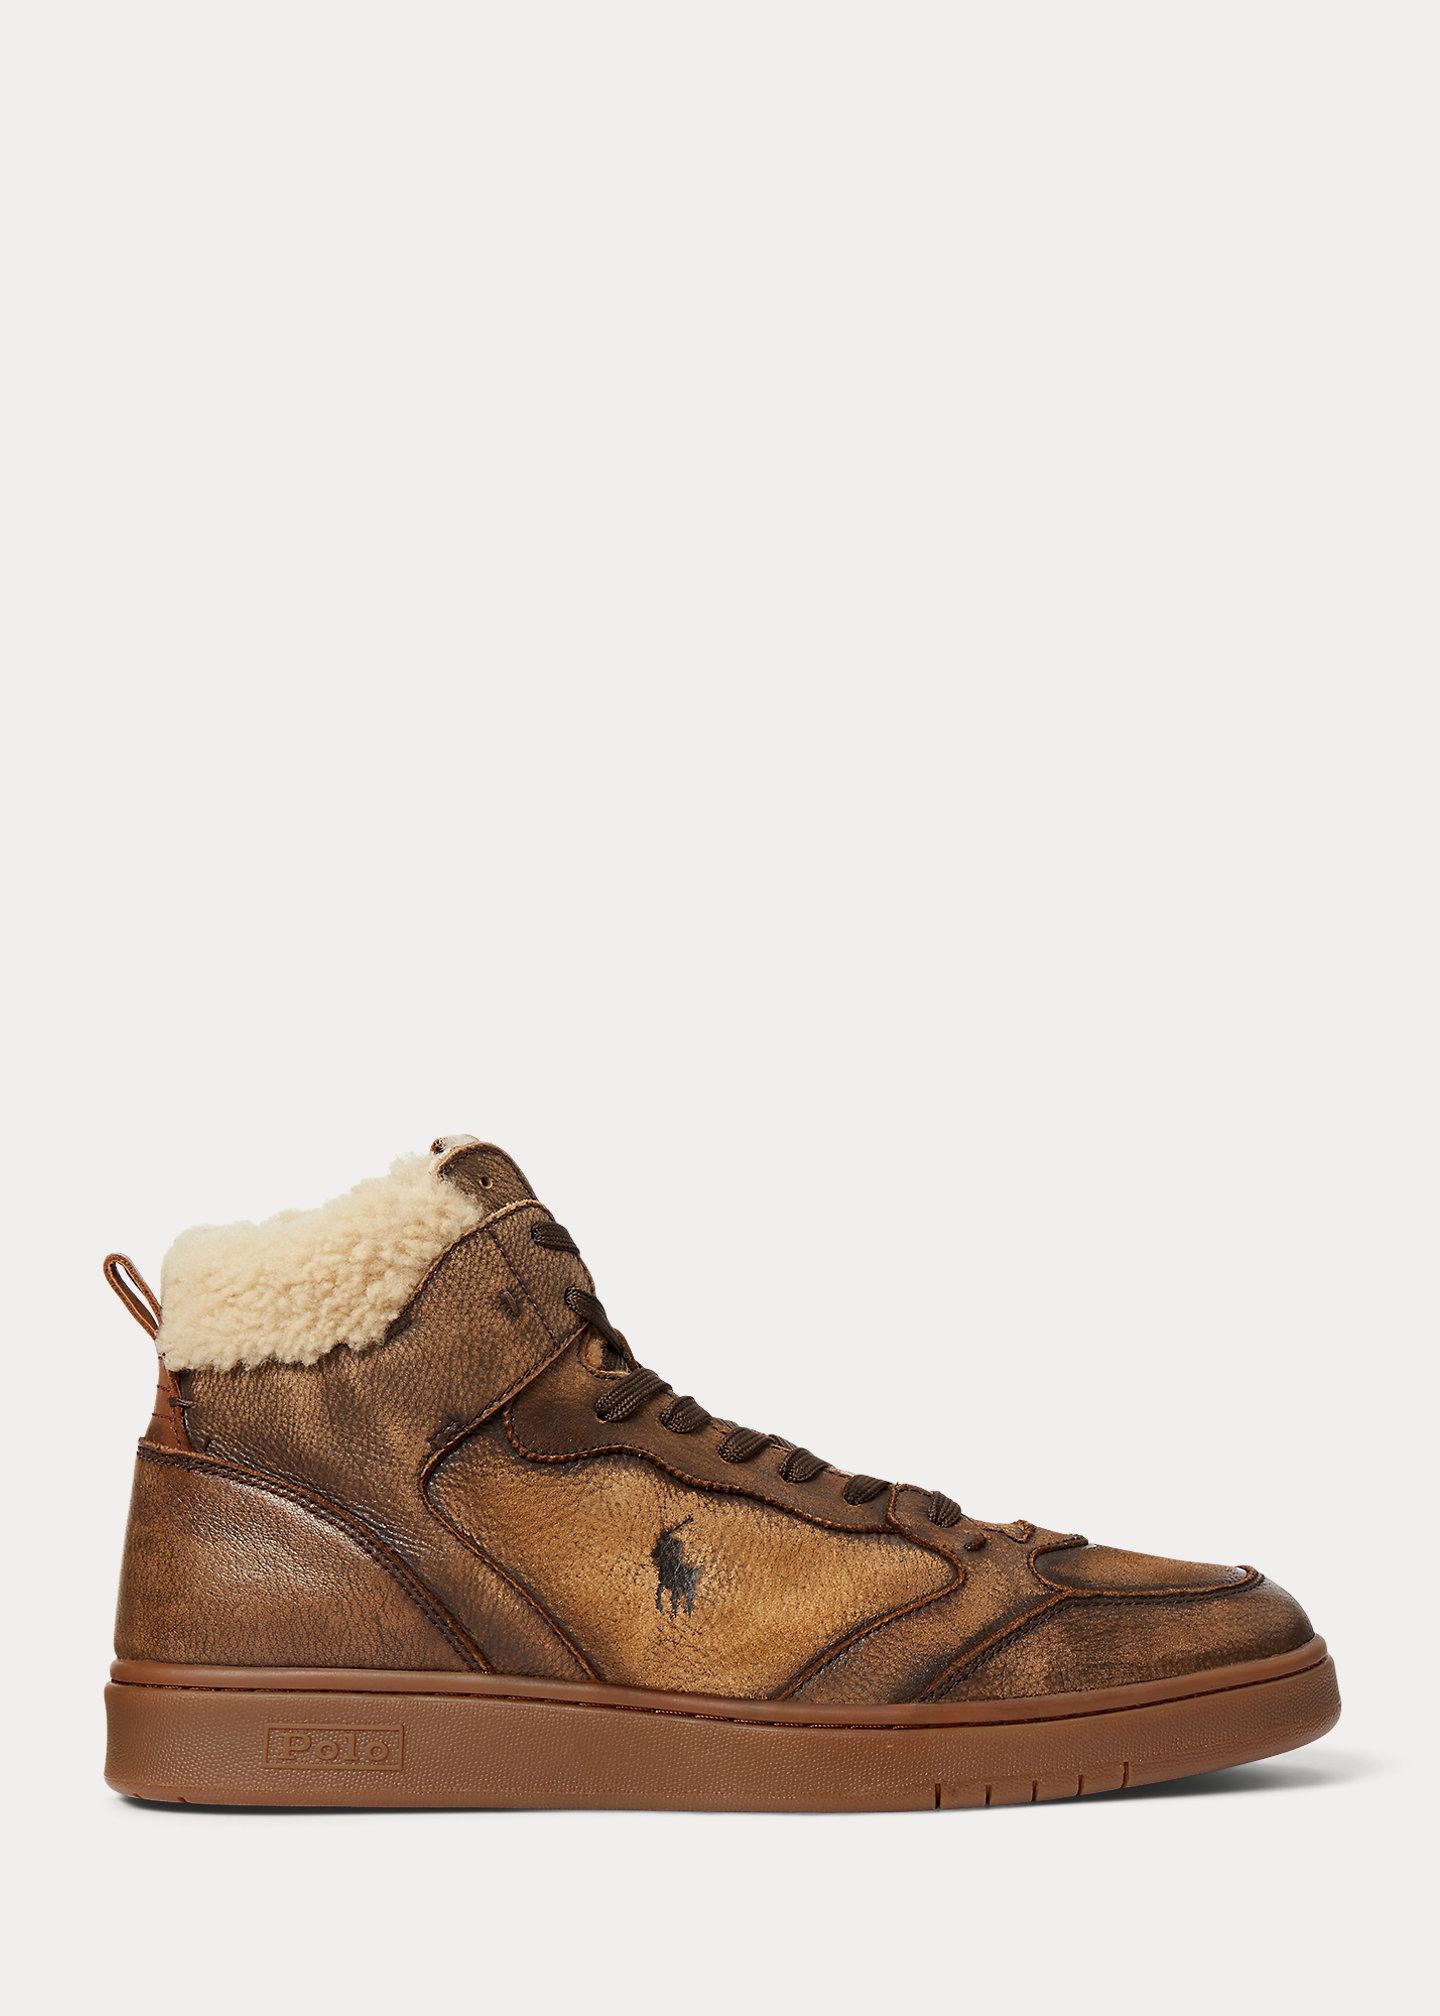 Court Leather-Shearling High-Top Sneaker